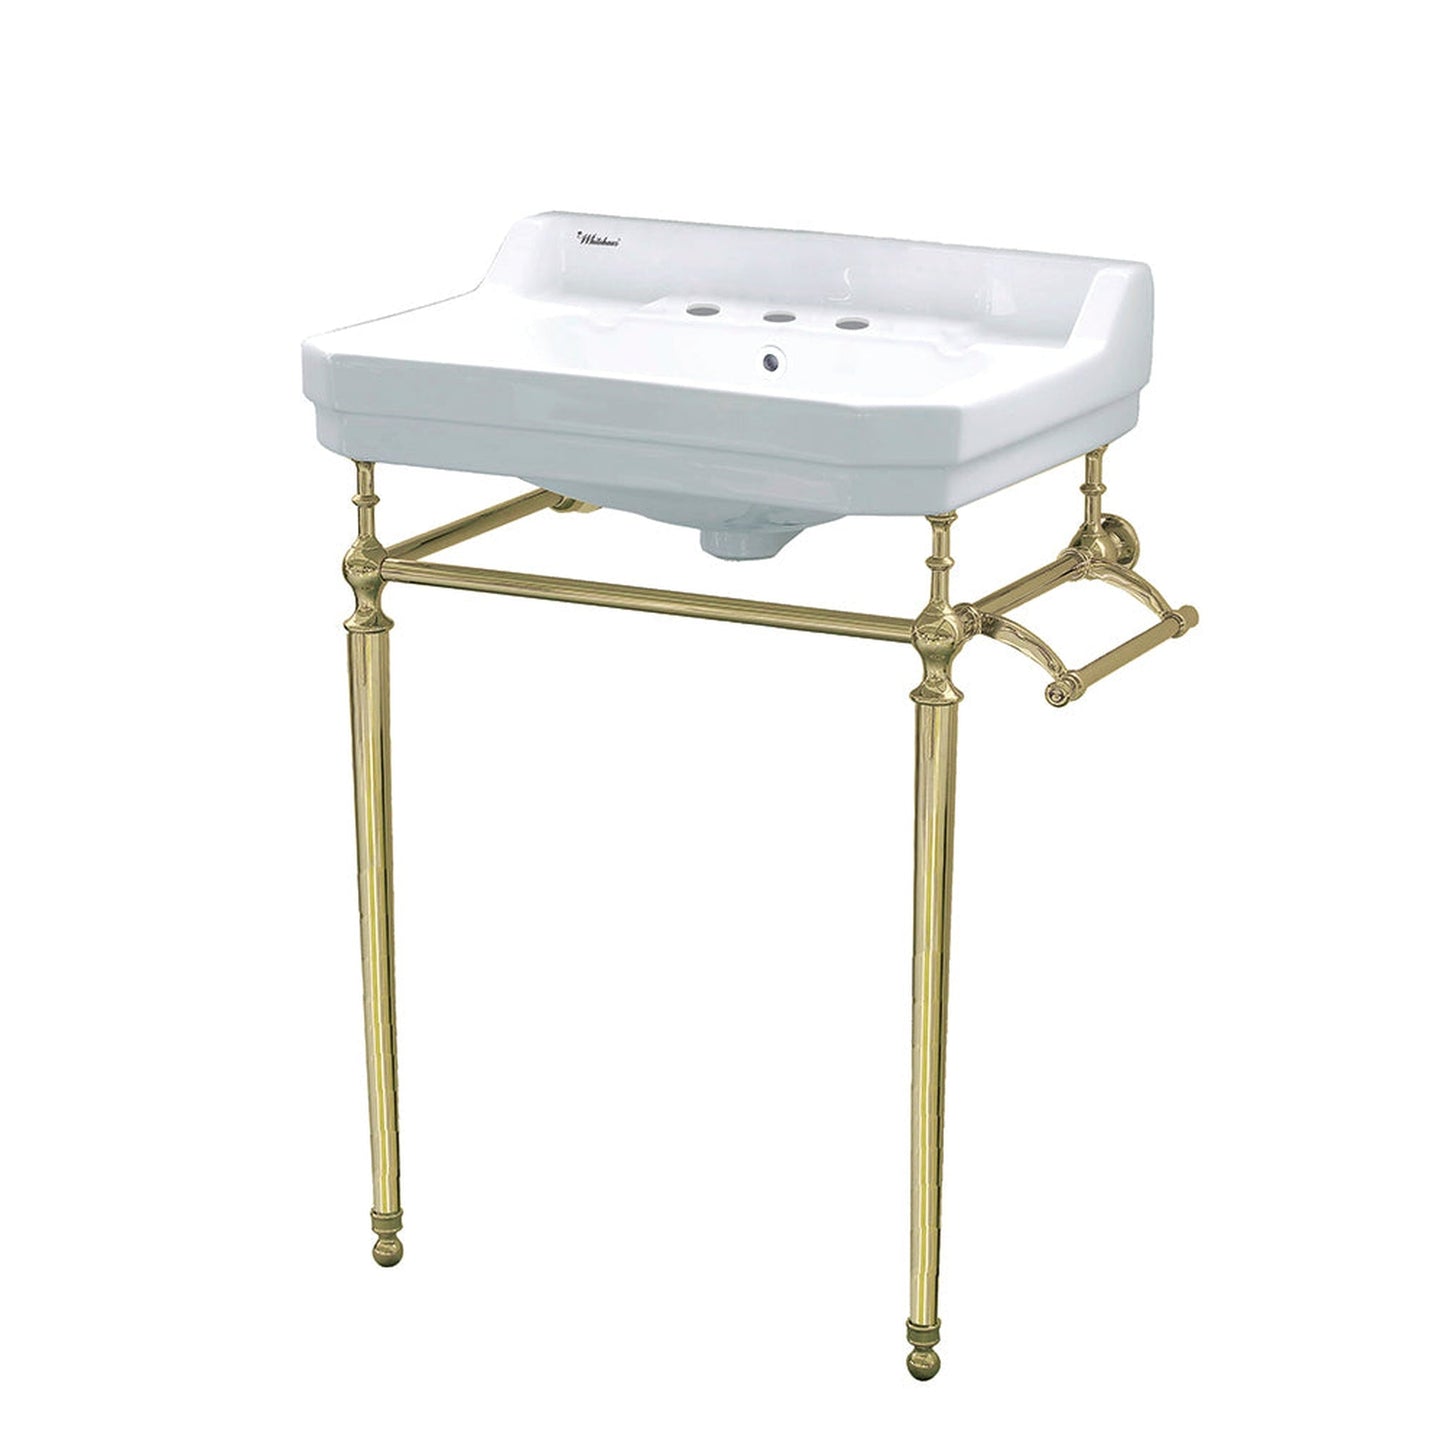 Whitehaus Victoriahaus WHV024-L33-3H-B White/Polished Brass Console With Integrated Rectangular Bowl With Widespread Hole Drill